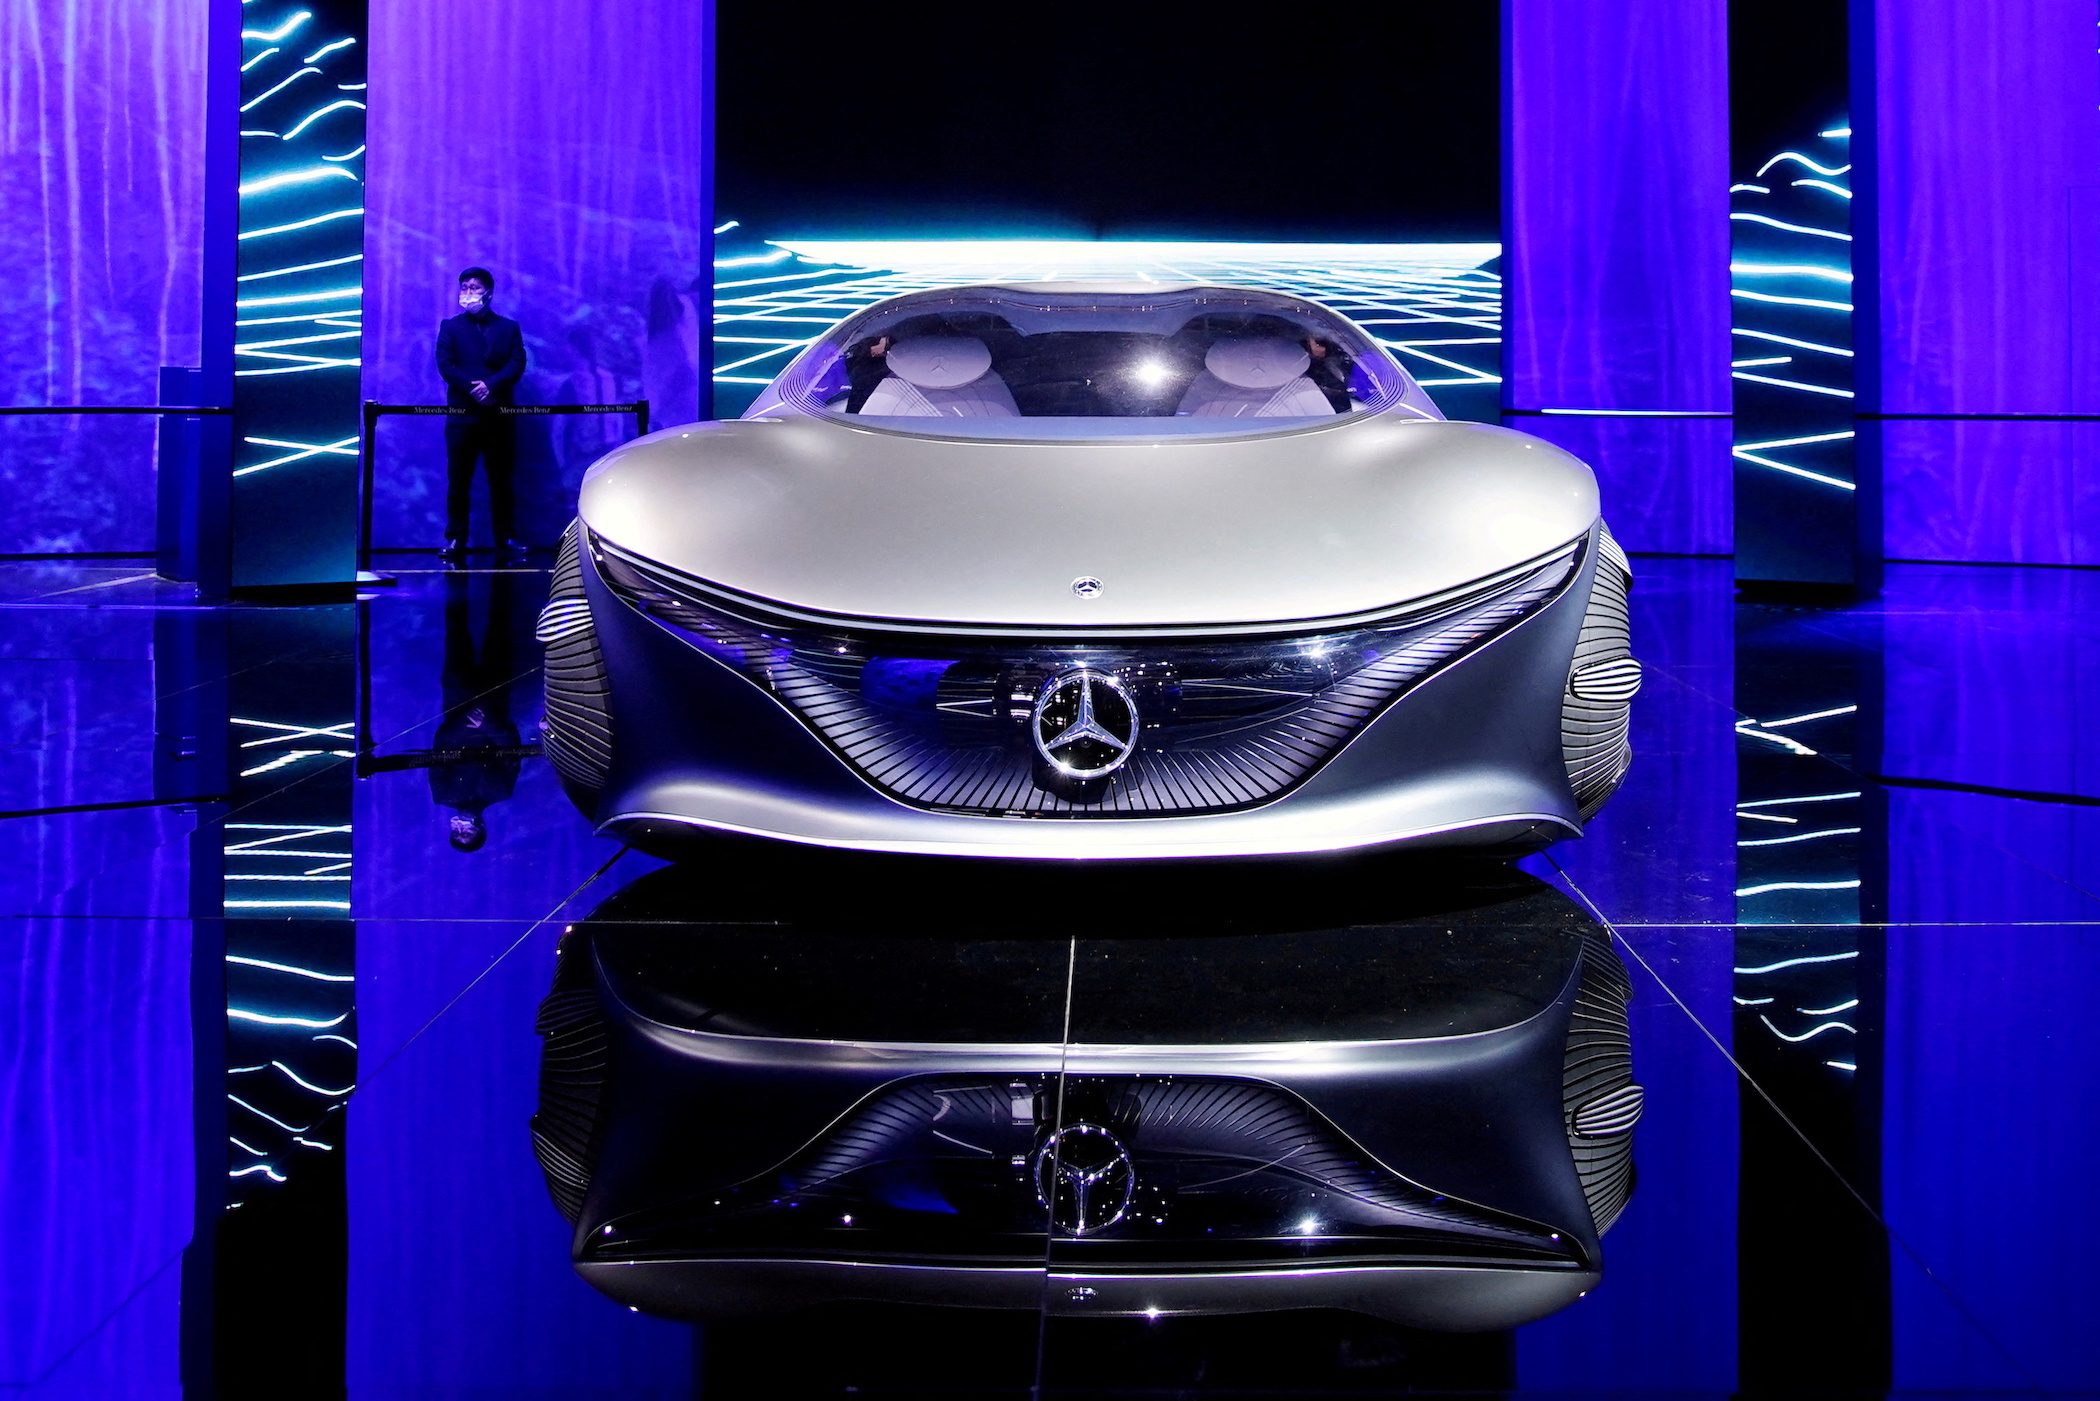 Mercedes-Benz says Russian nationalization could threaten $2.2 billion in assets